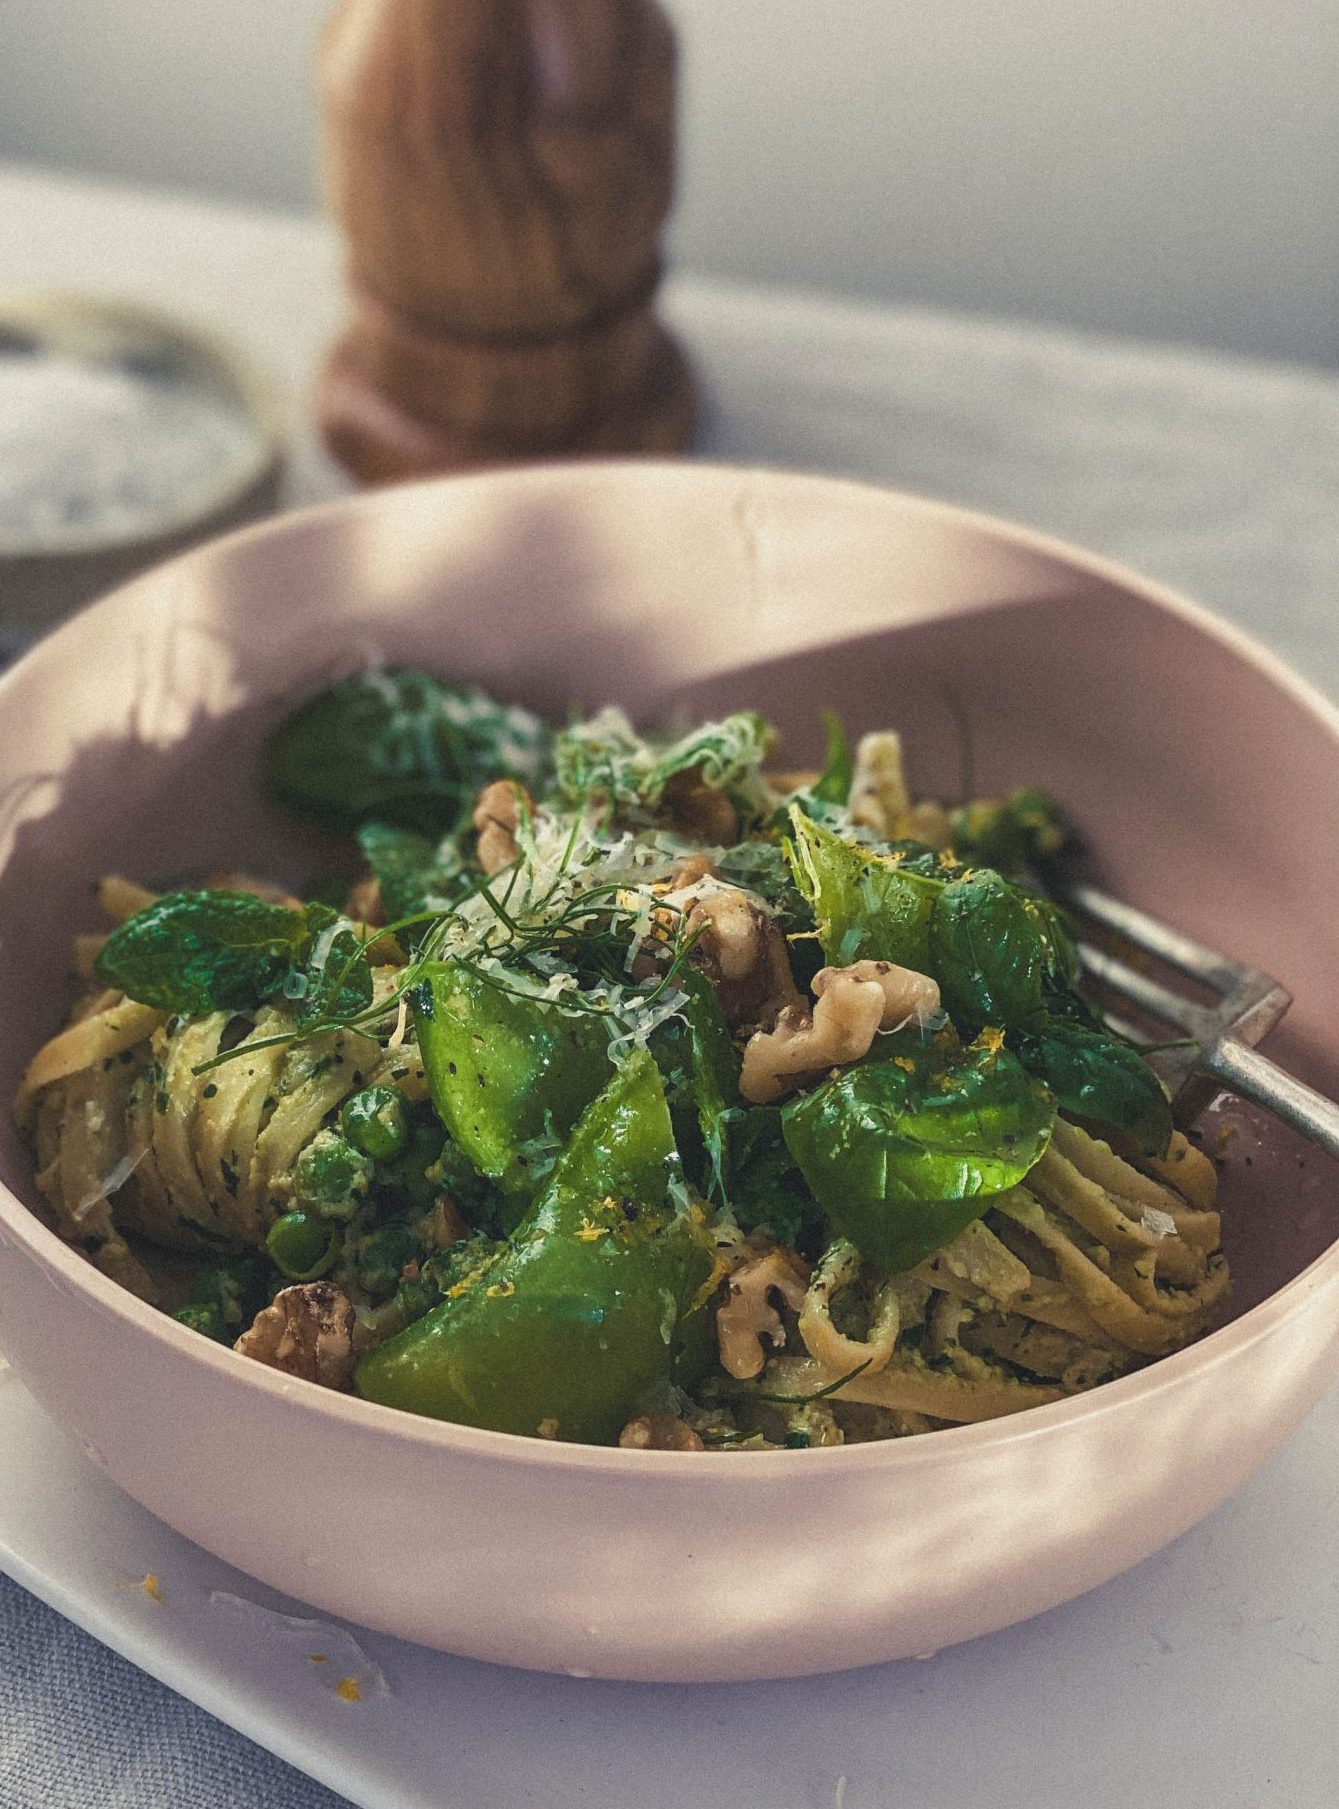 Styleware Style Files From Our Kitchen Recipe Series. The combination of walnuts, ricotta and herbs in this green linguine make it ever so moreish.